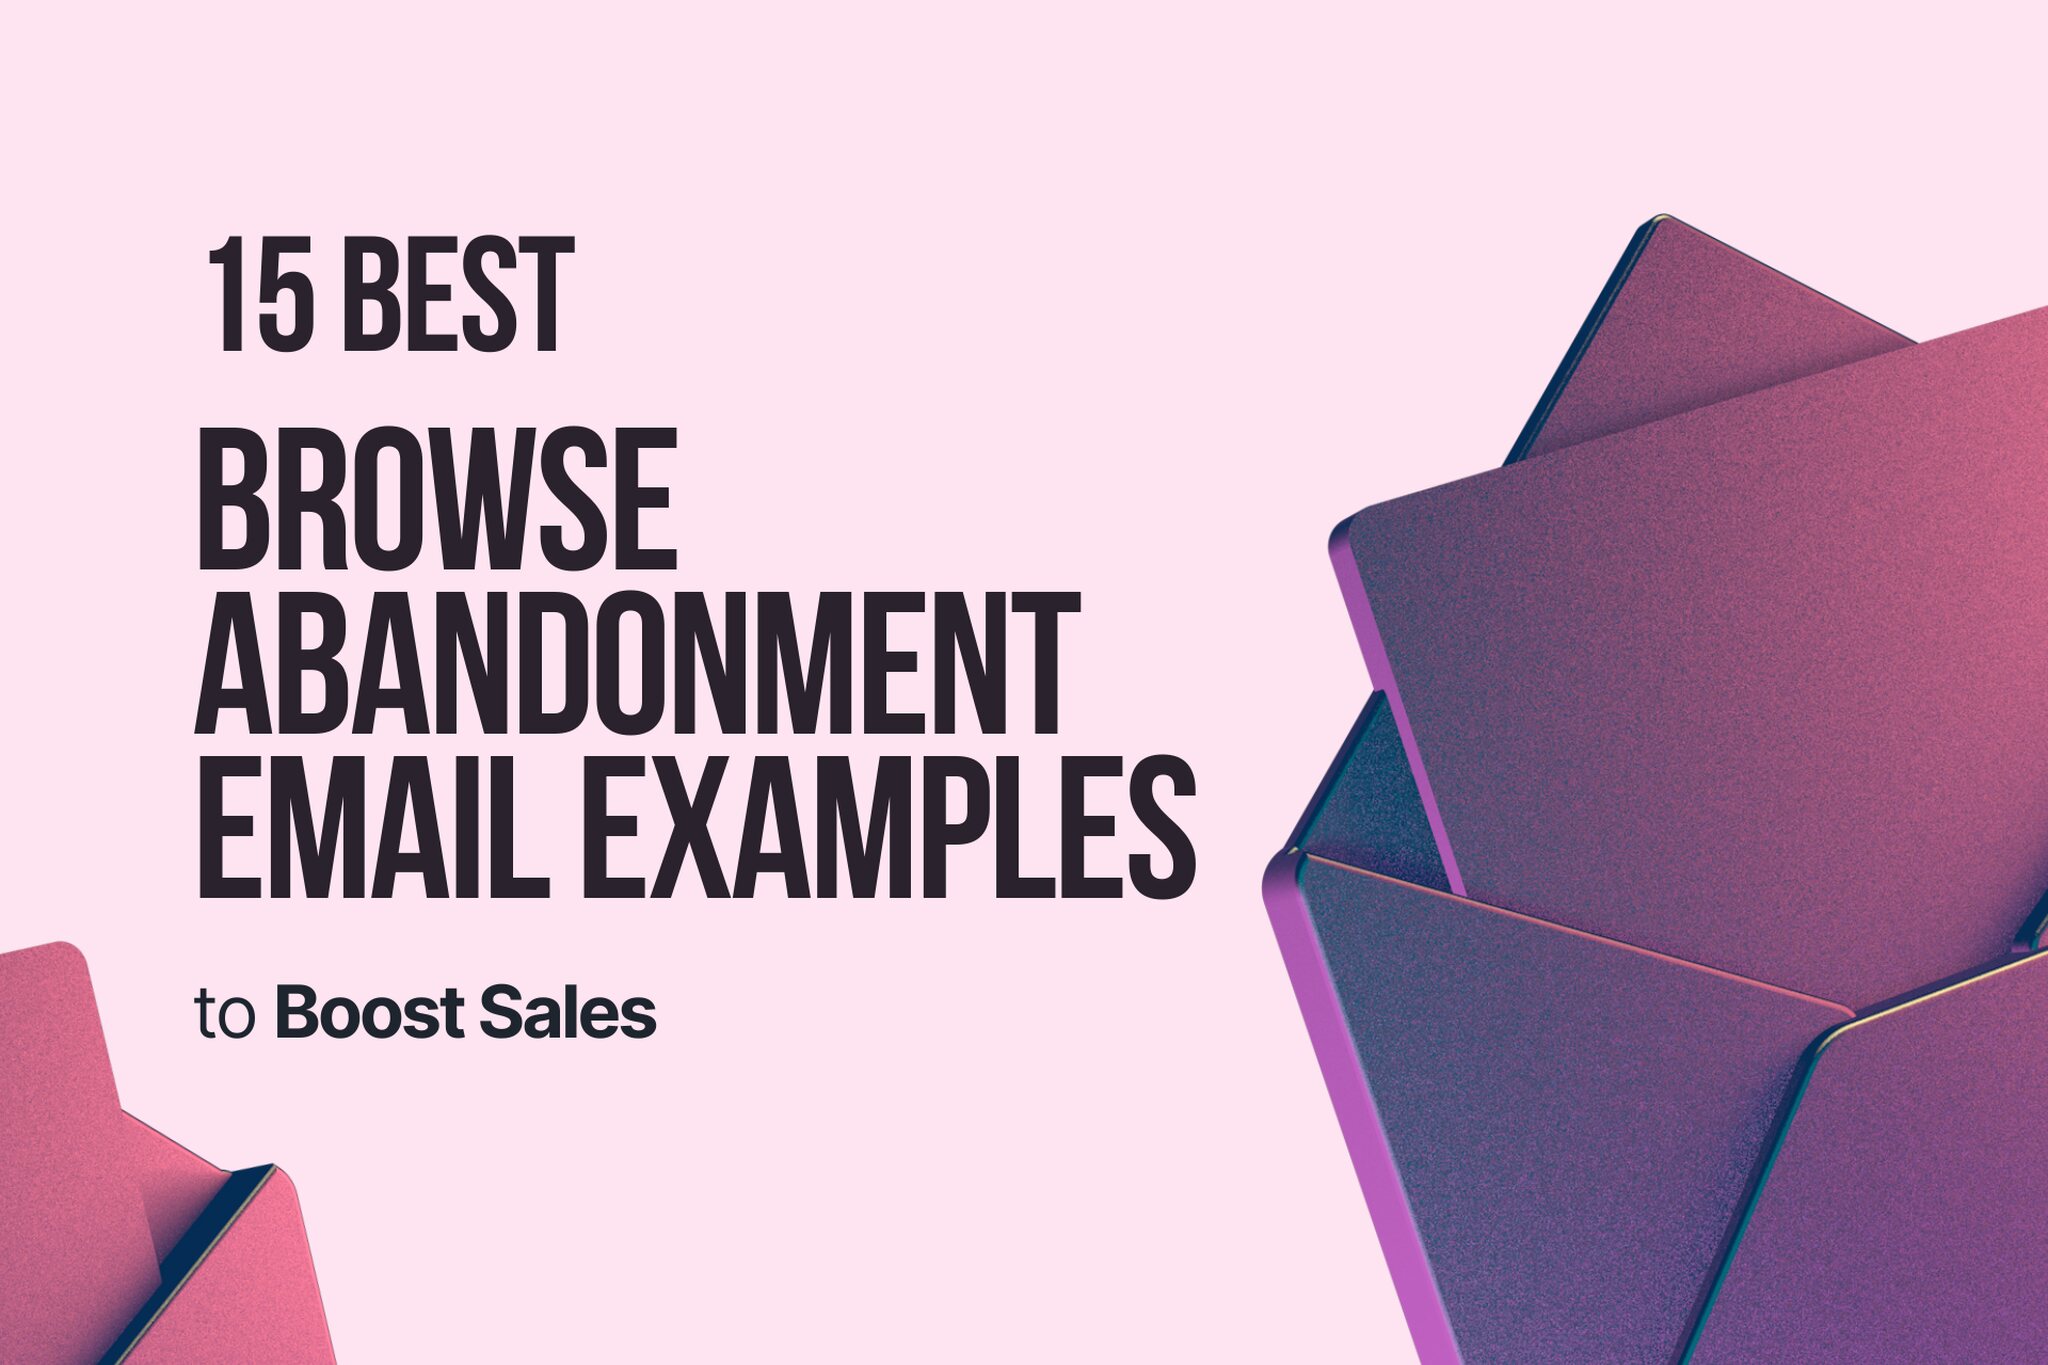 15 Best Browse Abandonment Email Examples to Boost Sales